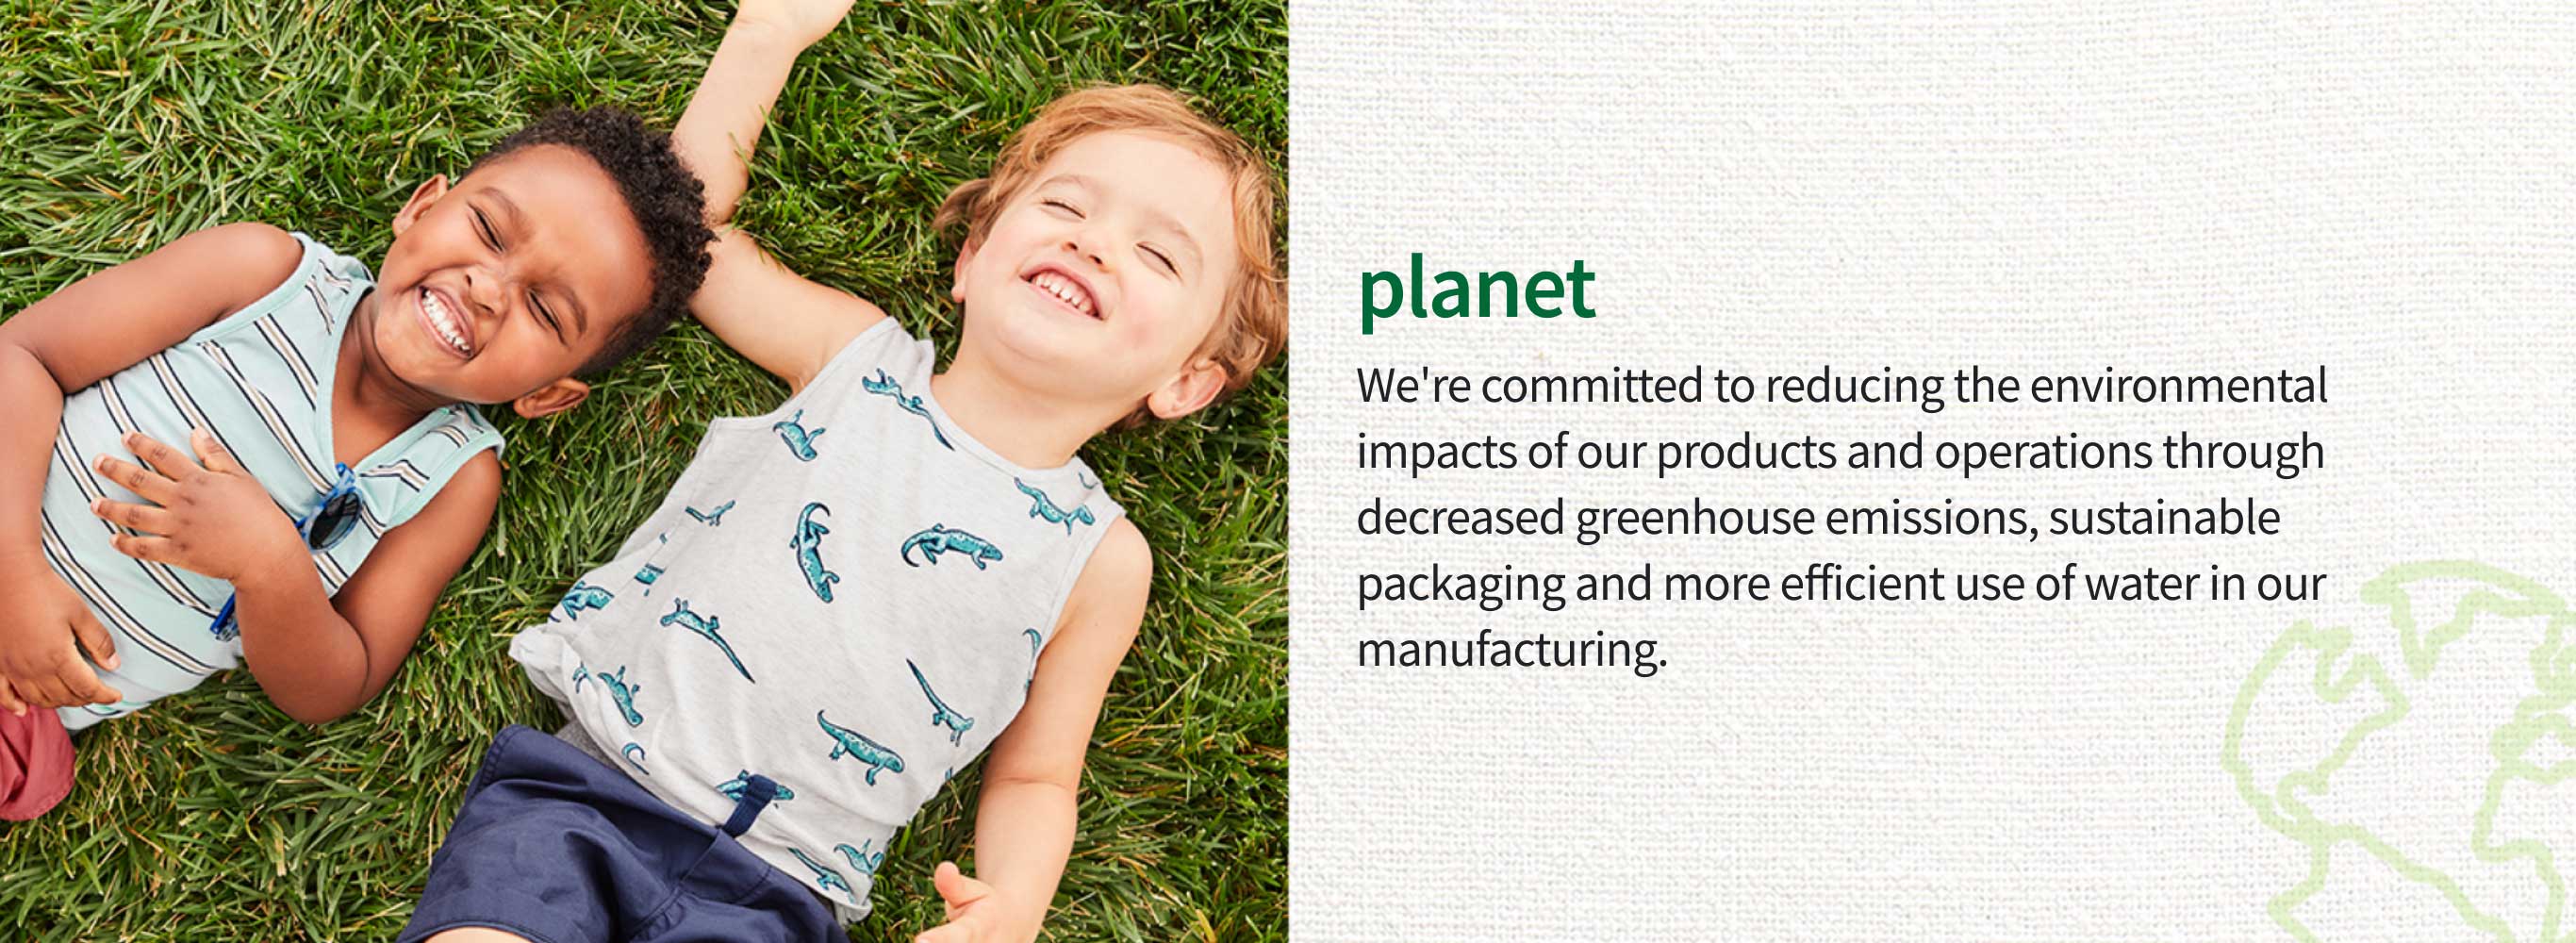 planet | We're committed to reducing the environmental impacts of our products and operations through decreased greenhouse emissions, sustainable packaging and more efficient use of water in our manufacturing.